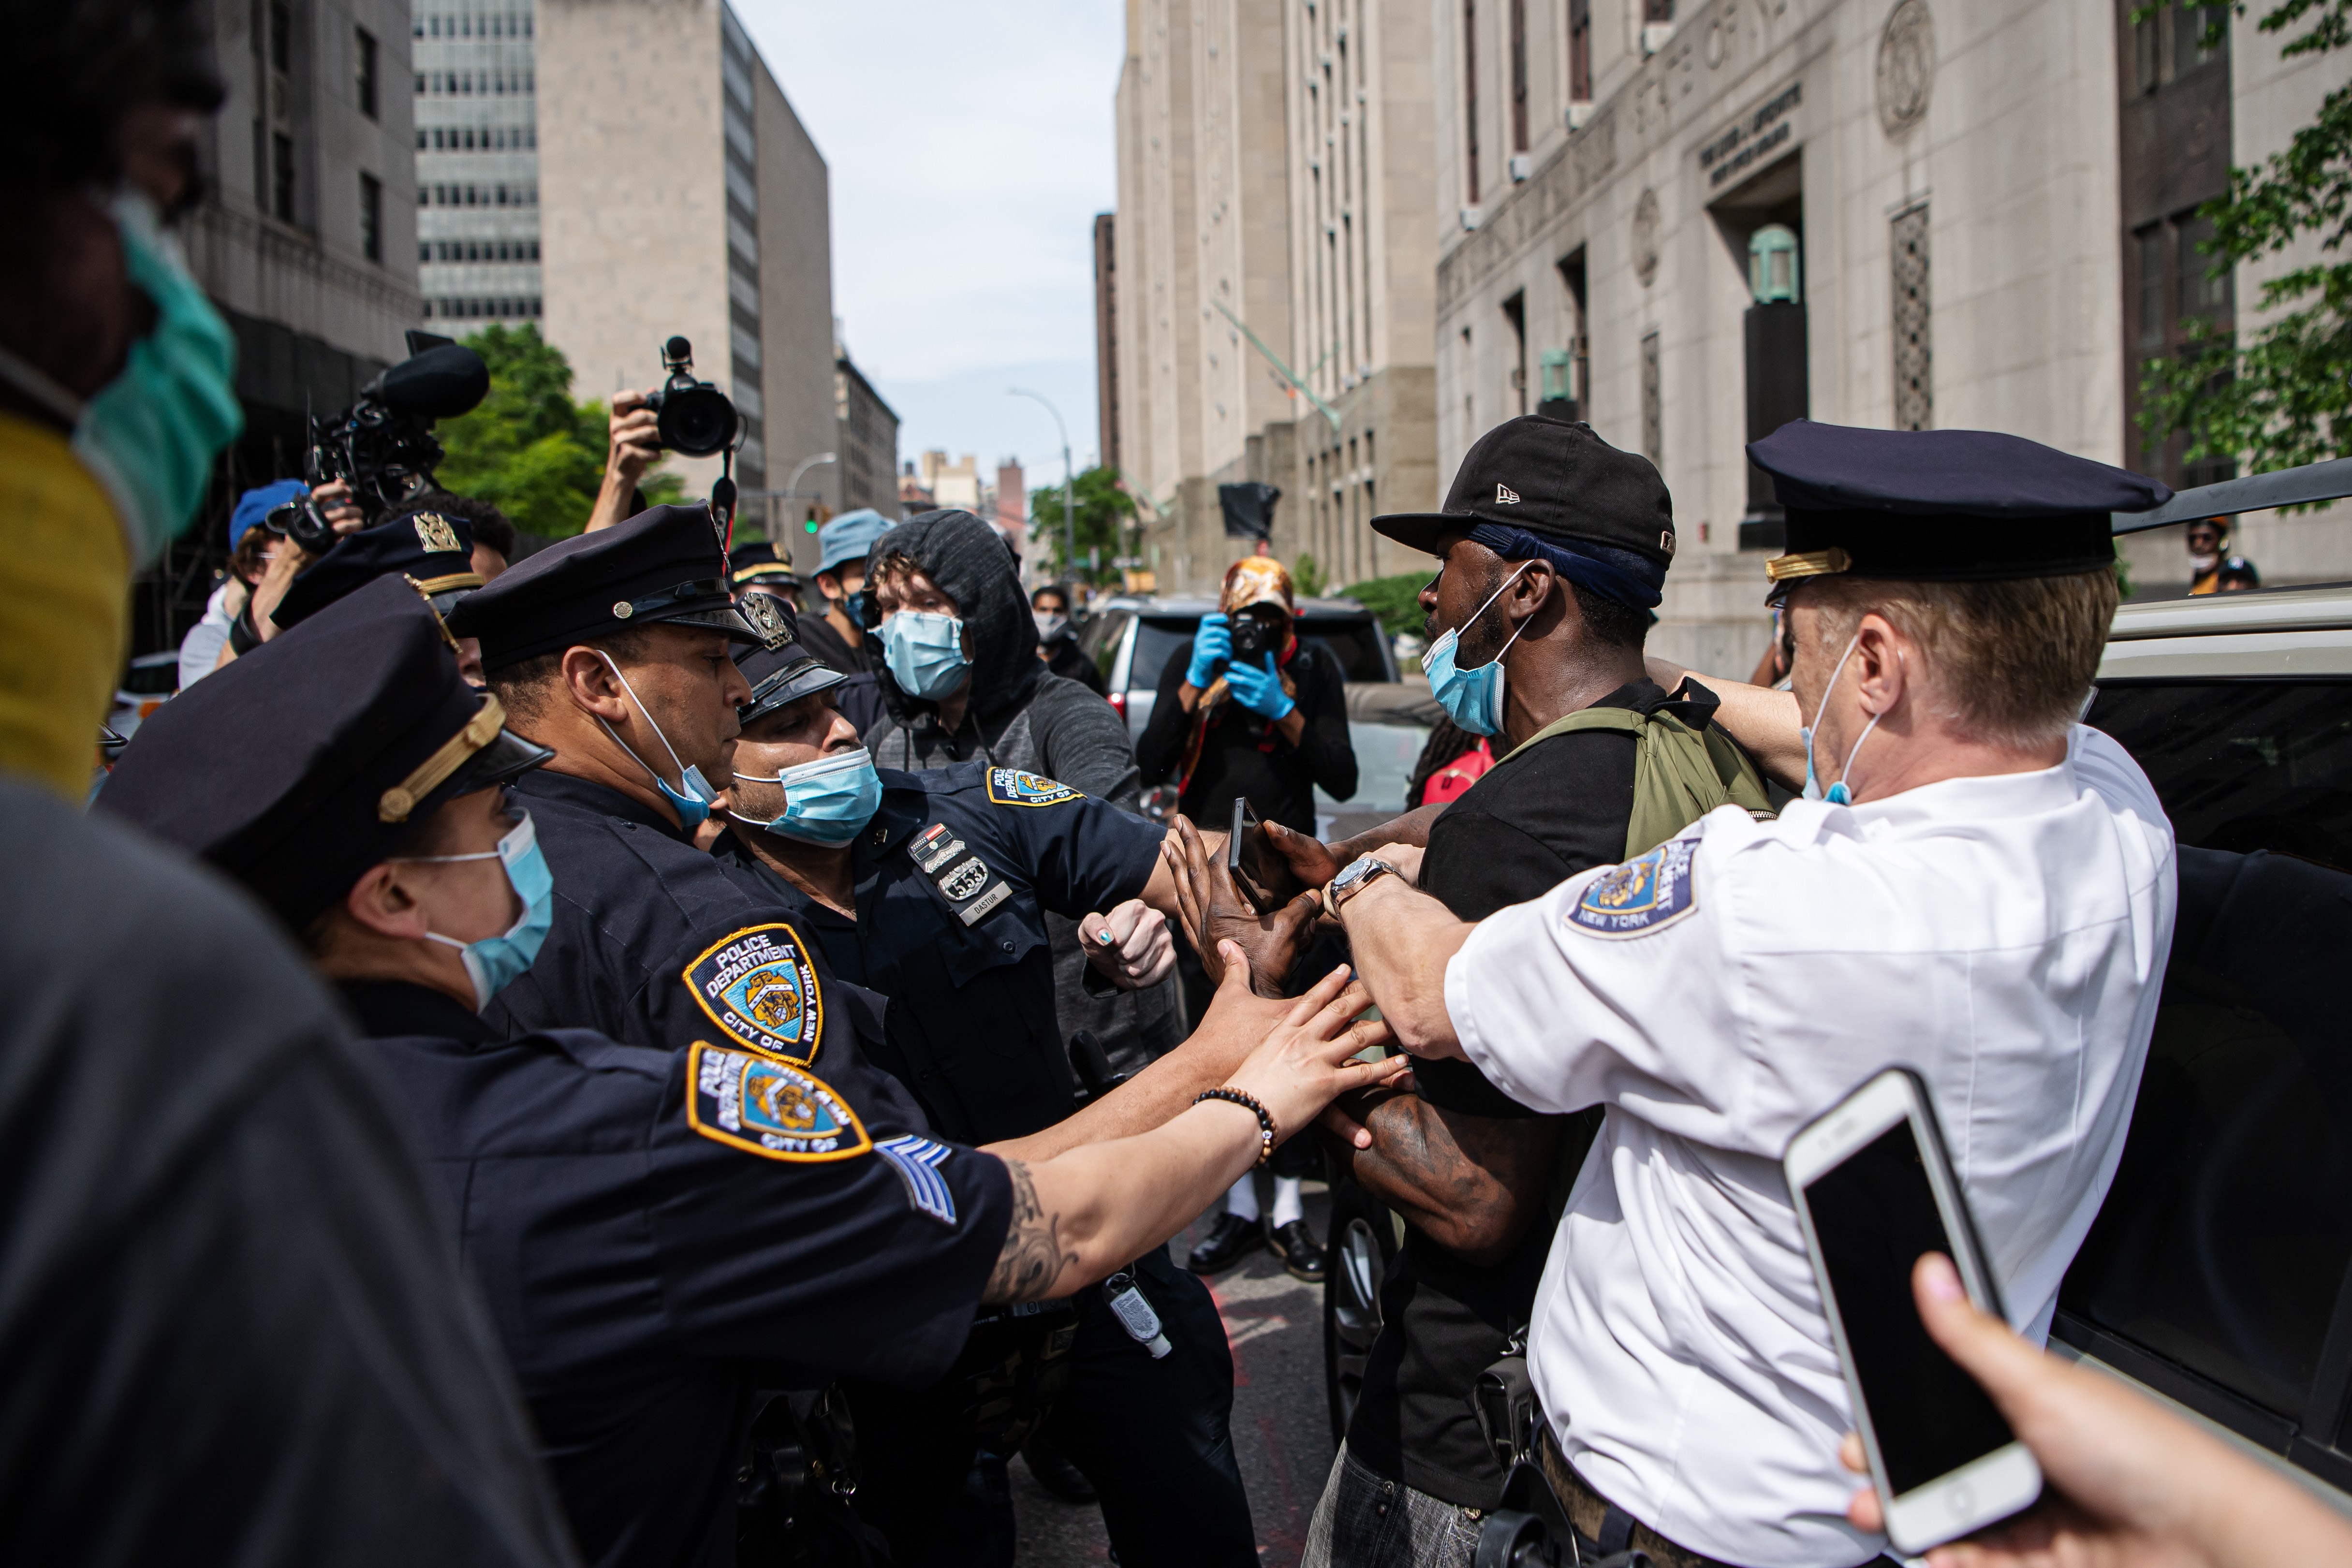 A demonstrator is arrested by police at a We Can't Breathe rally in protest over the death of George Floyd, on May 29, 2020 in the Manhattan borough of New York, NY, USA. Photo: Joel Marklund